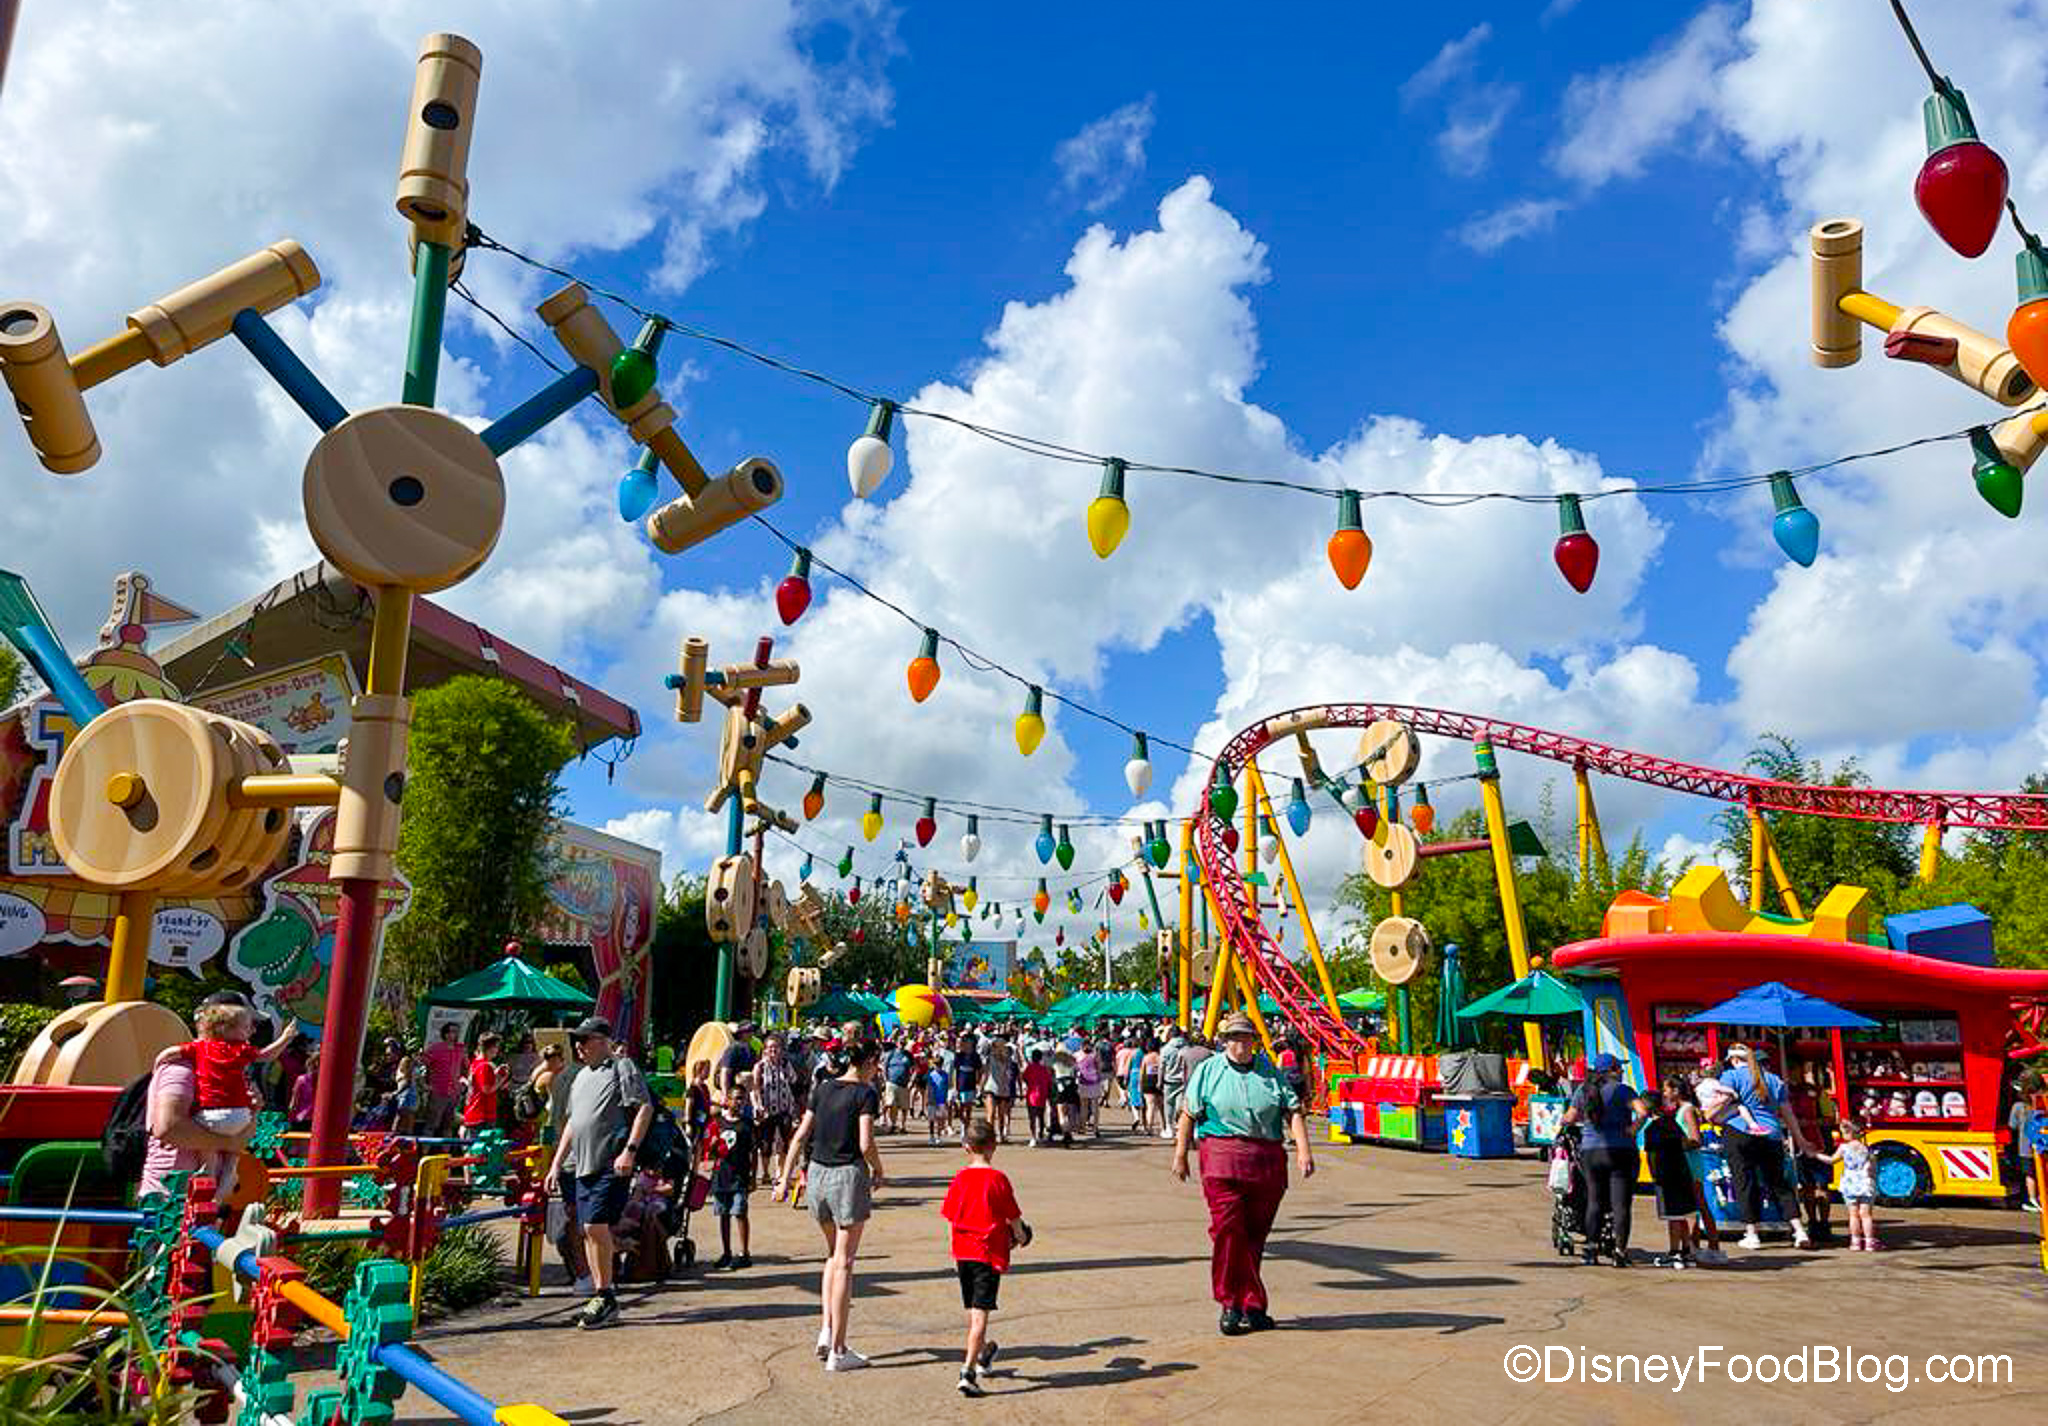 Toy Story Land in Disney World's Hollywood Studios